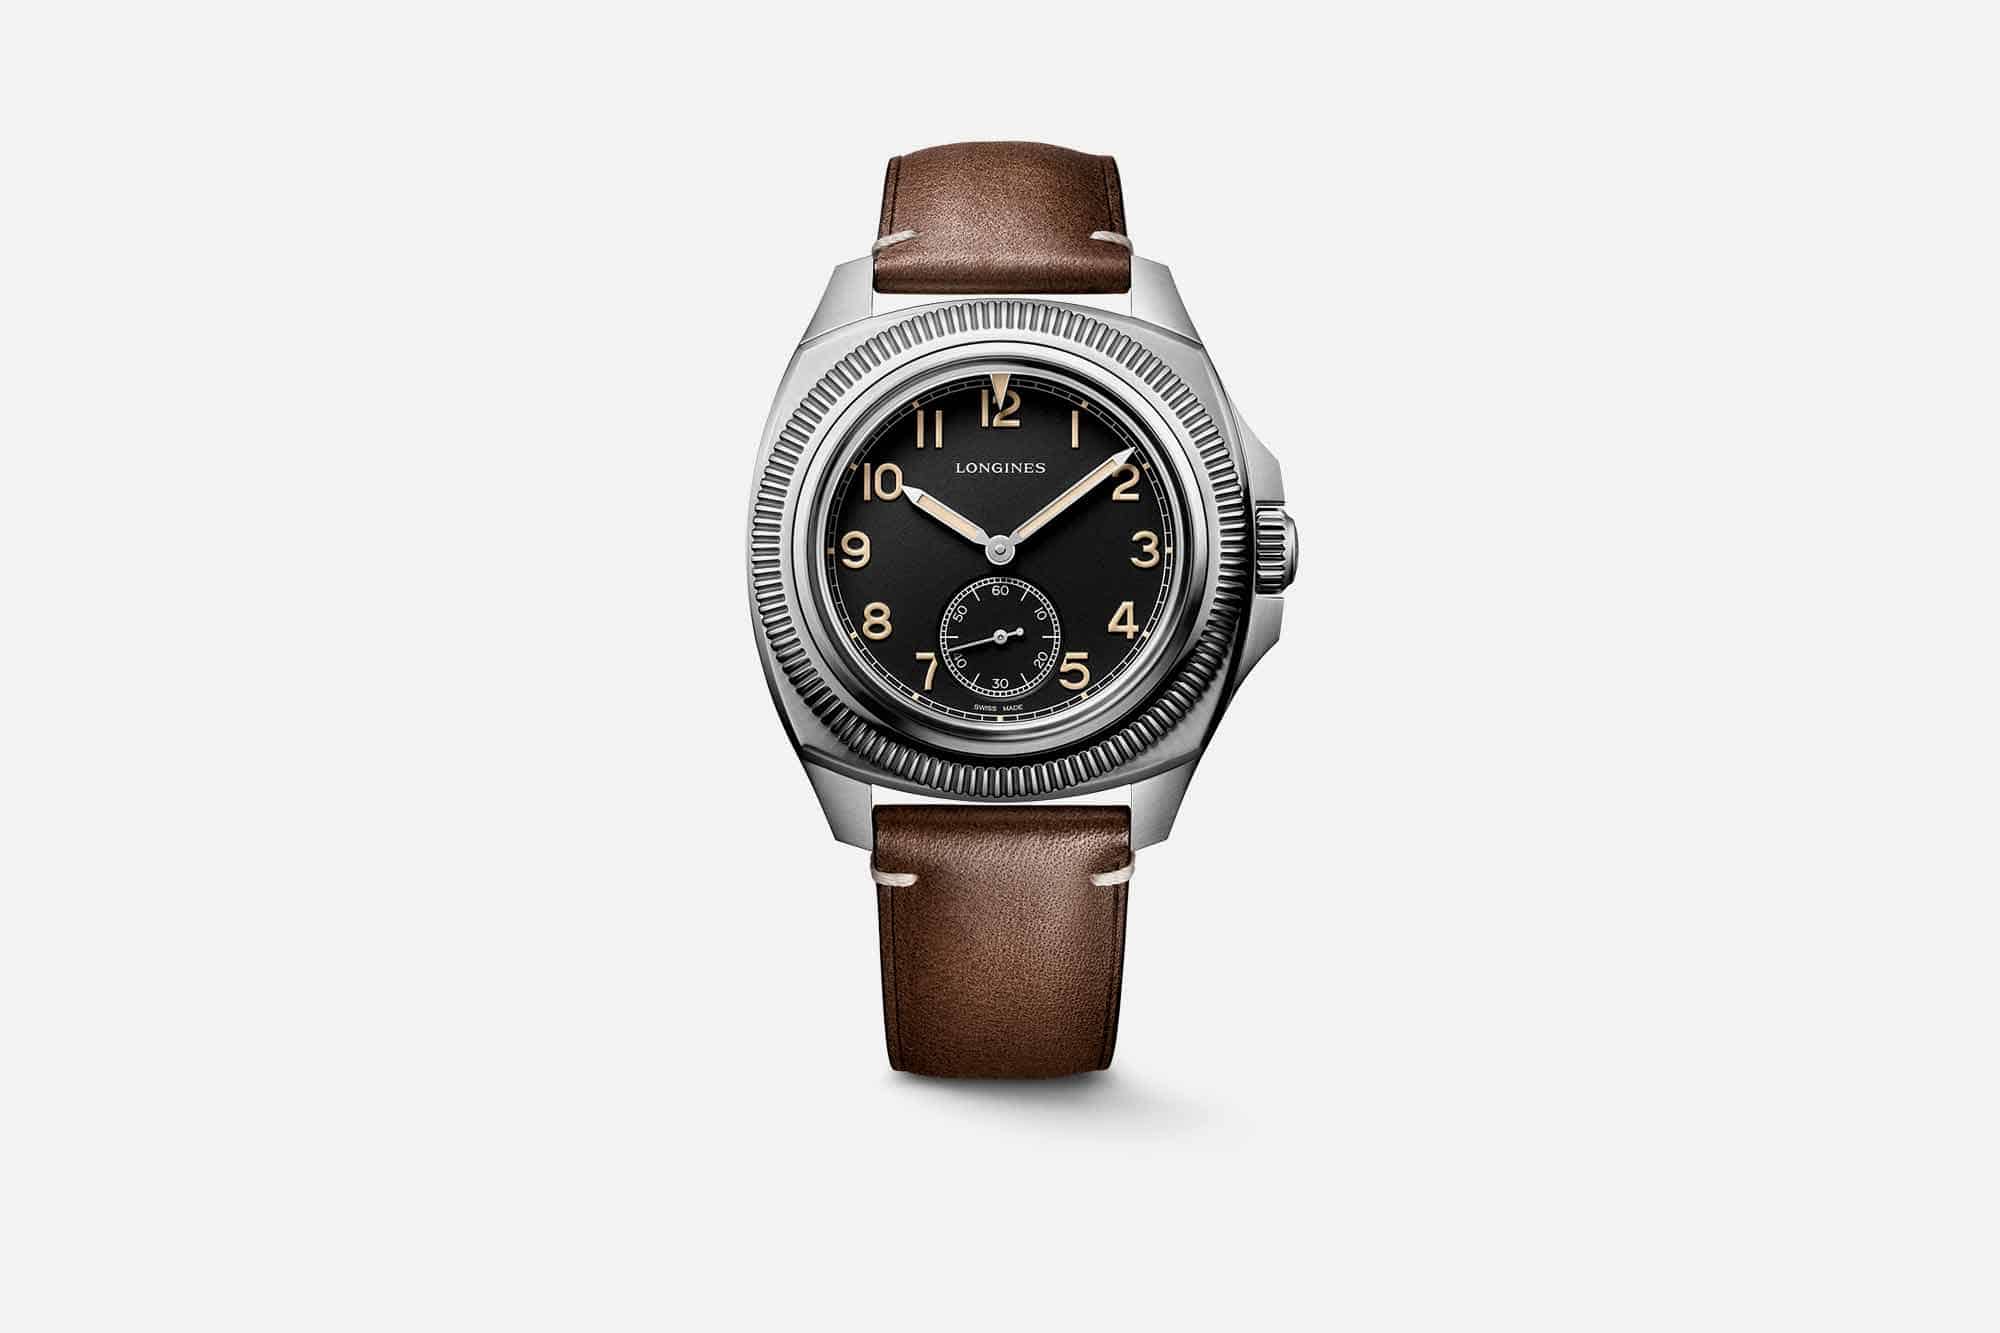 Longines Reaches Back Nearly 100 Years for their Latest Heritage Release, the Pilot Majetek